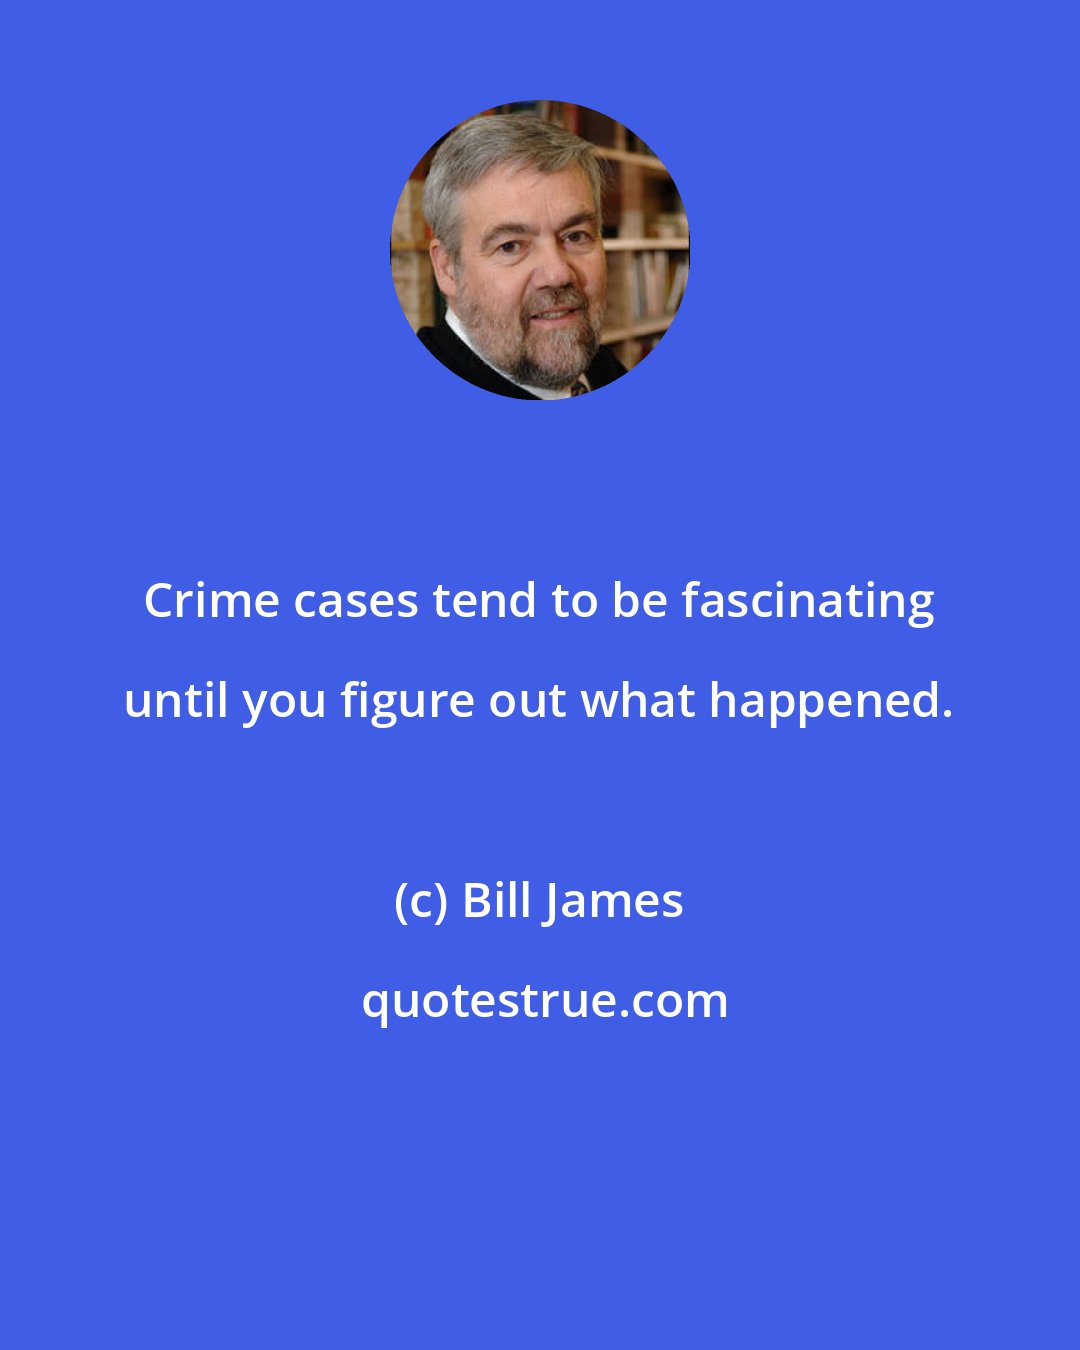 Bill James: Crime cases tend to be fascinating until you figure out what happened.